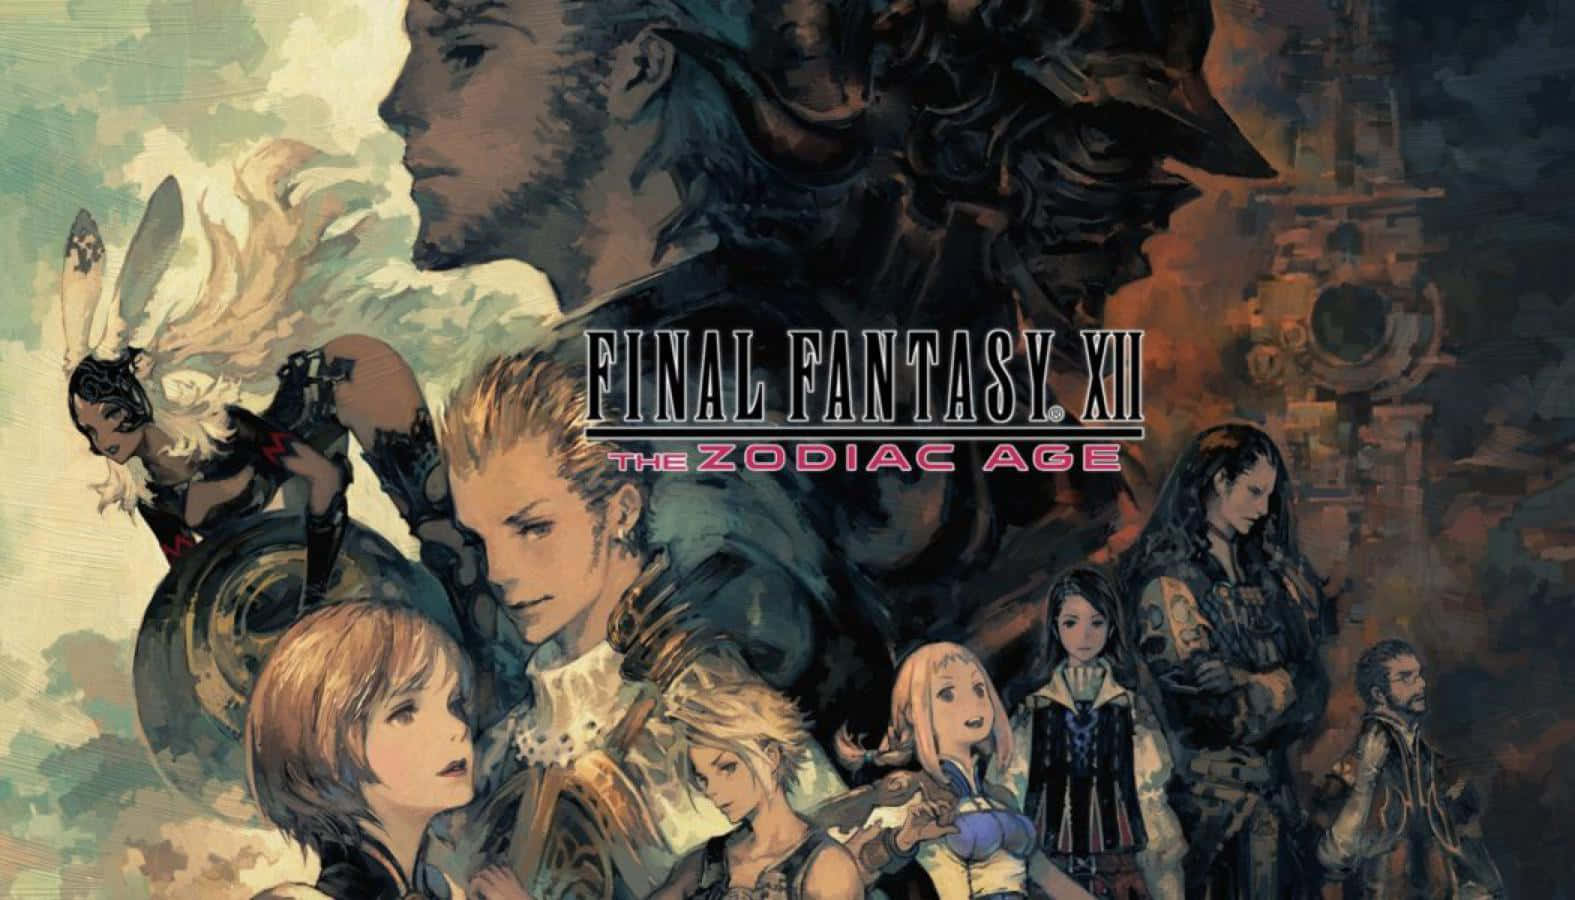 Epic Adventure In Ivalice - Final Fantasy Xii Gameplay Wallpaper